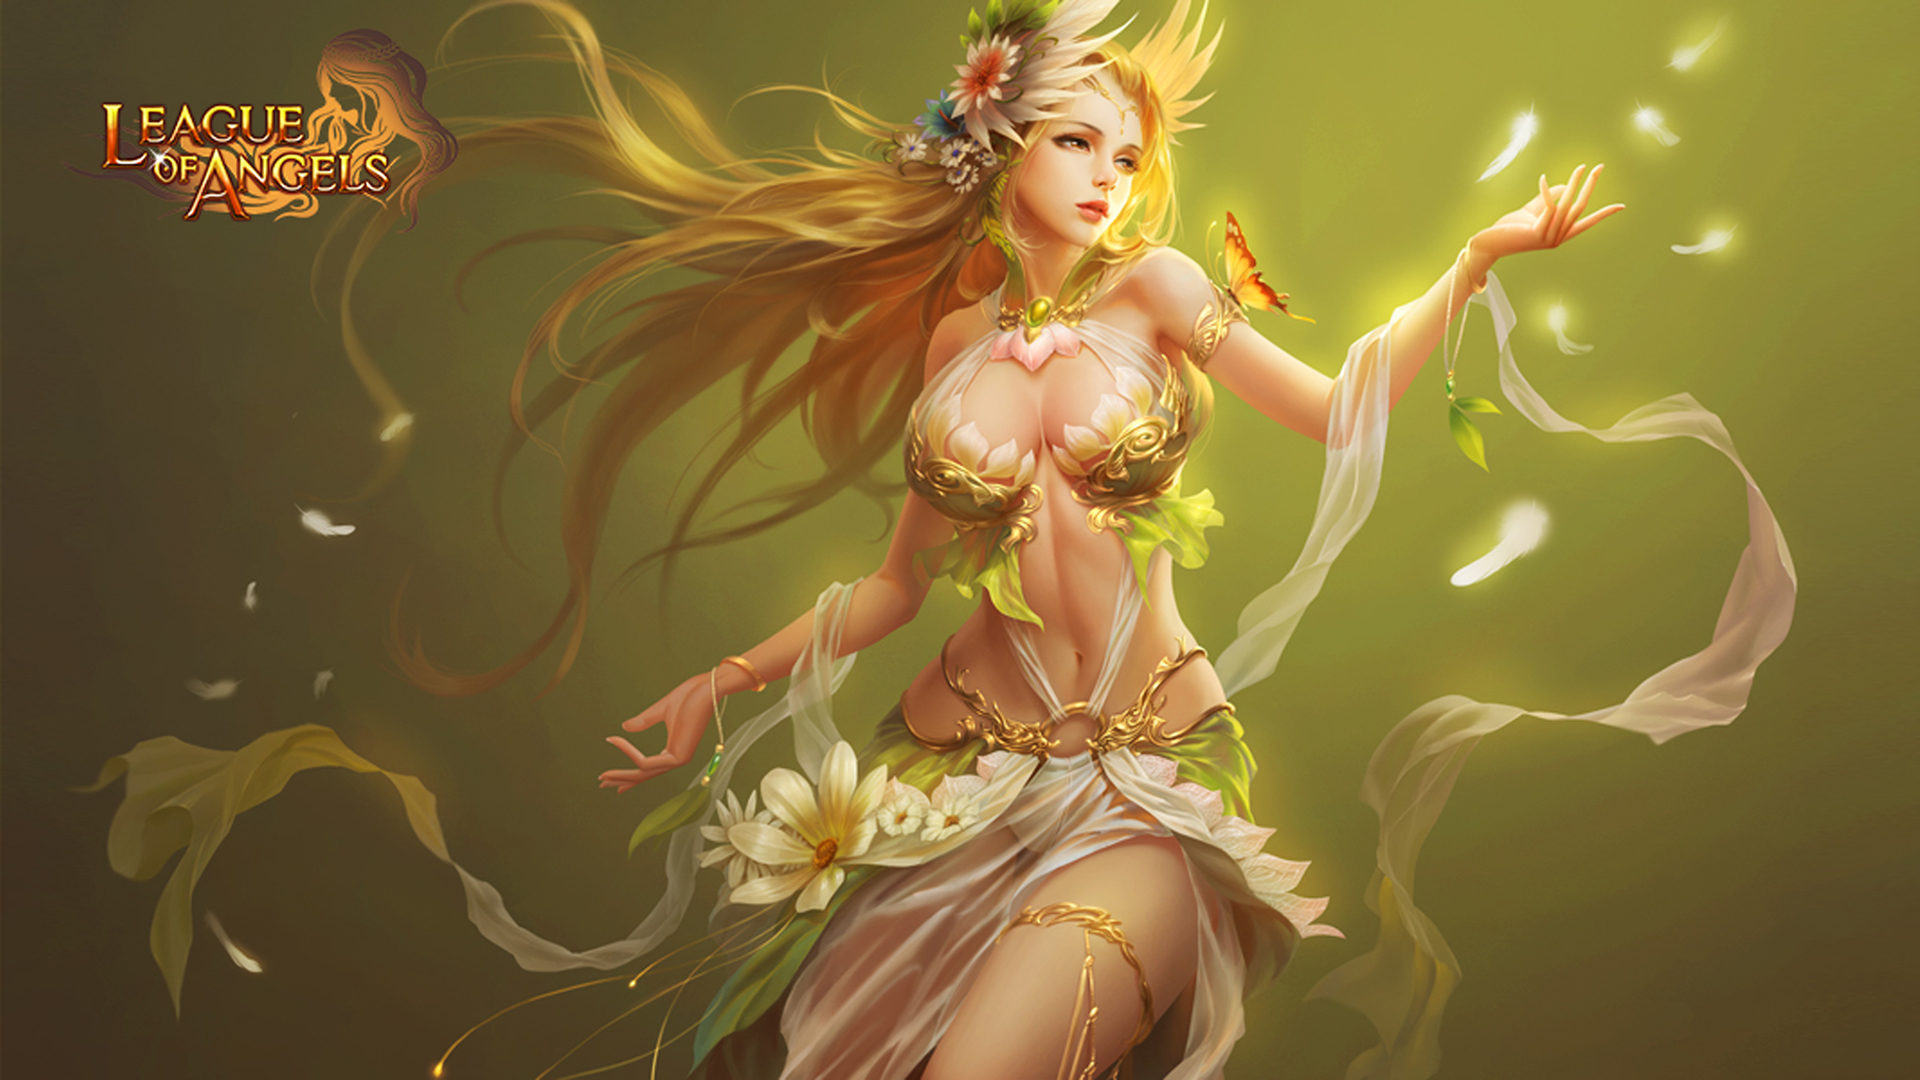 League of Angels (Gaming), Beauty girl, Sylvia and nature, Desktop background, 1920x1080 Full HD Desktop